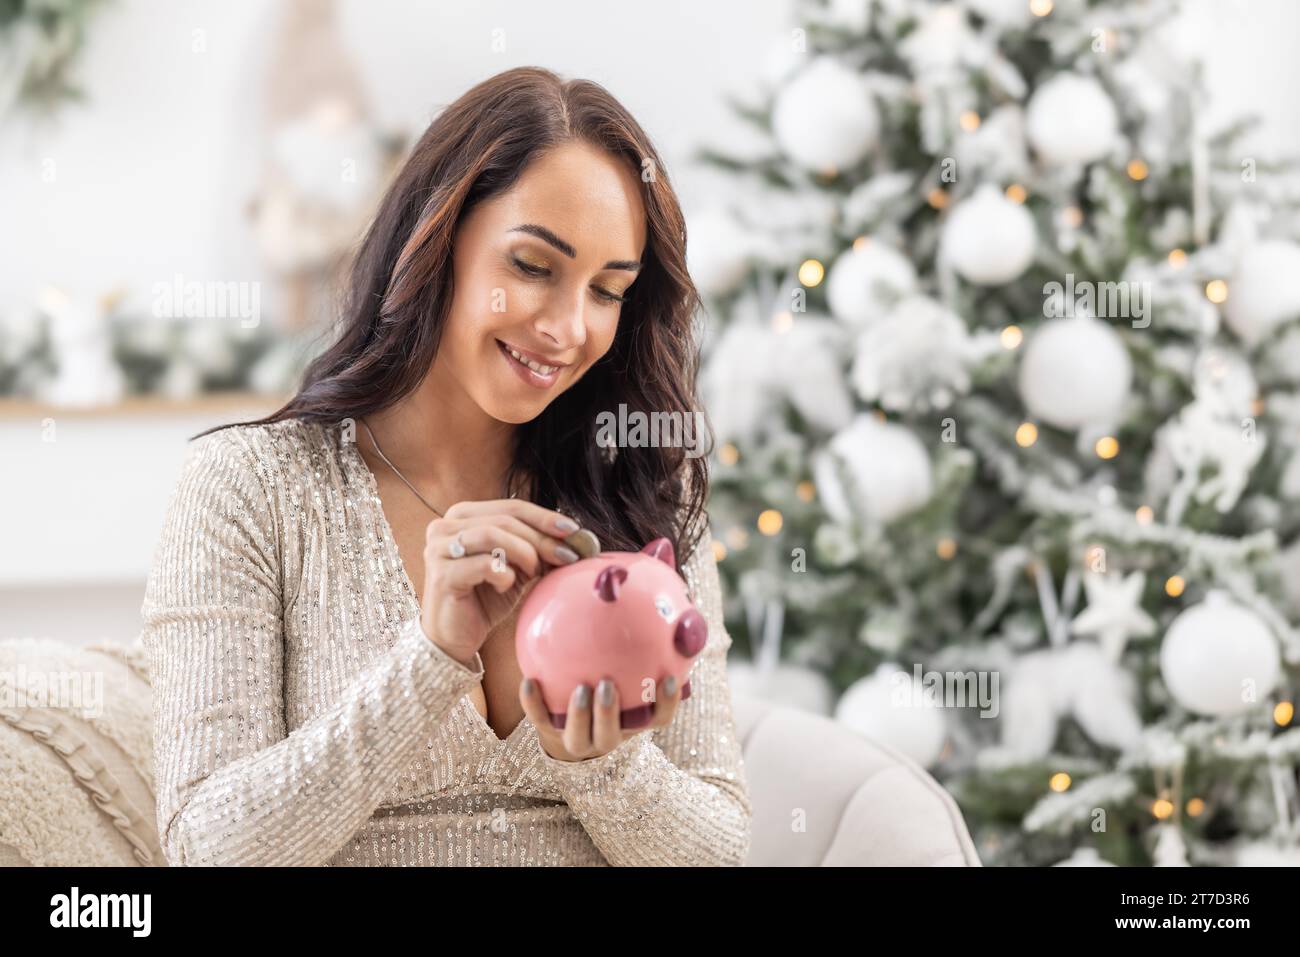 Smiling woman puts a coin into a pink piggybank sitting next to a Christmas tree. Stock Photo